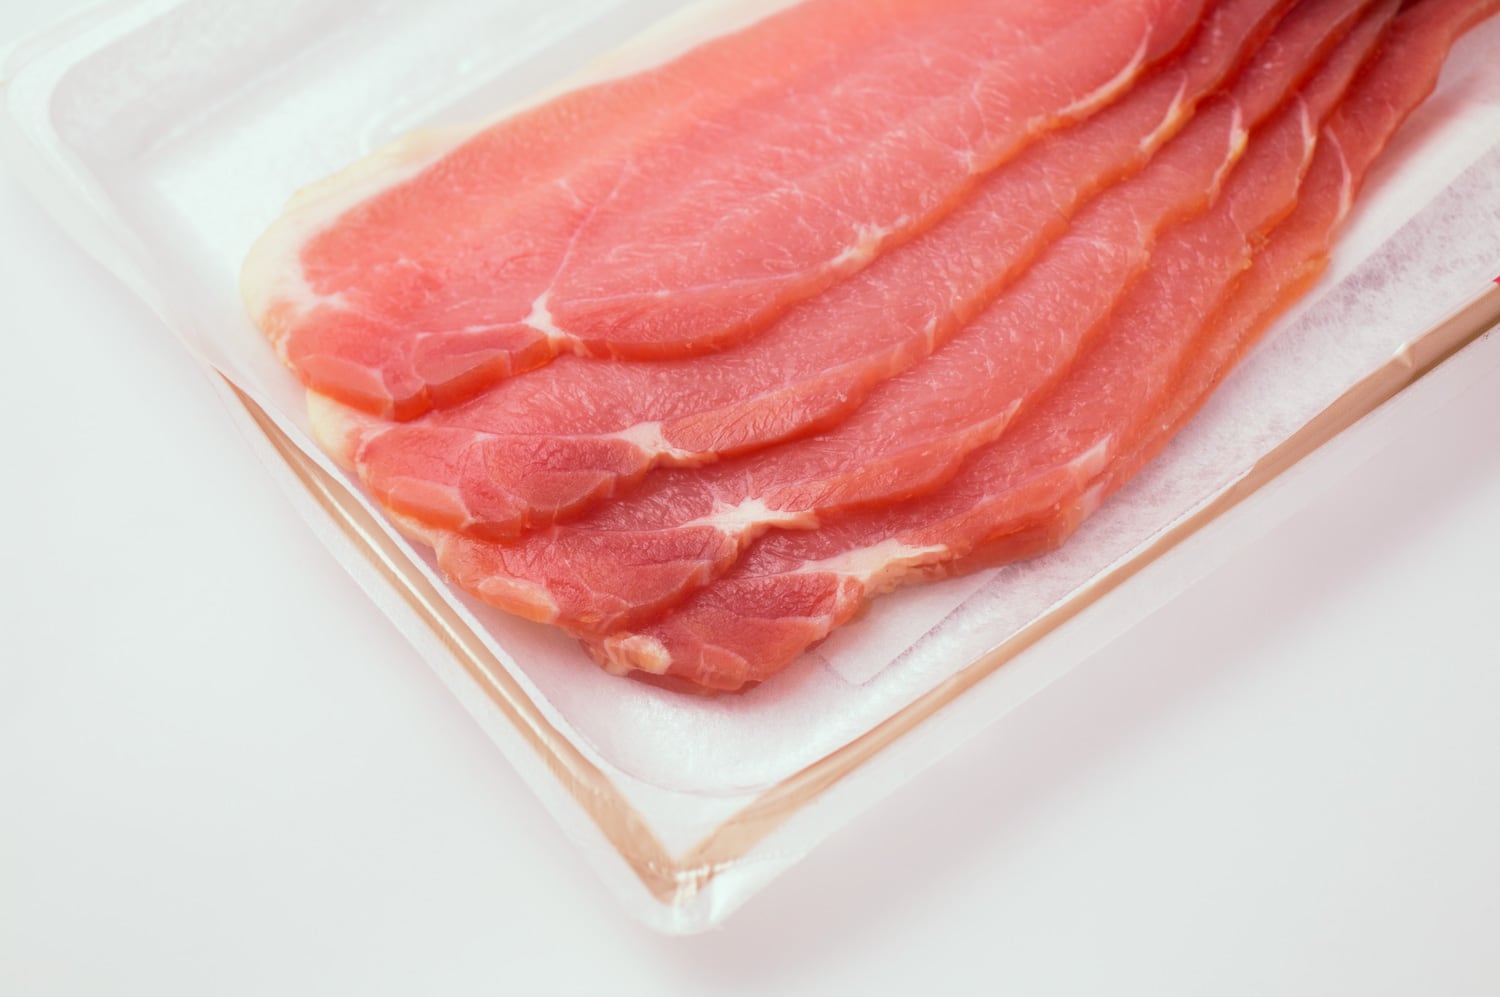 Pack of bacon slices